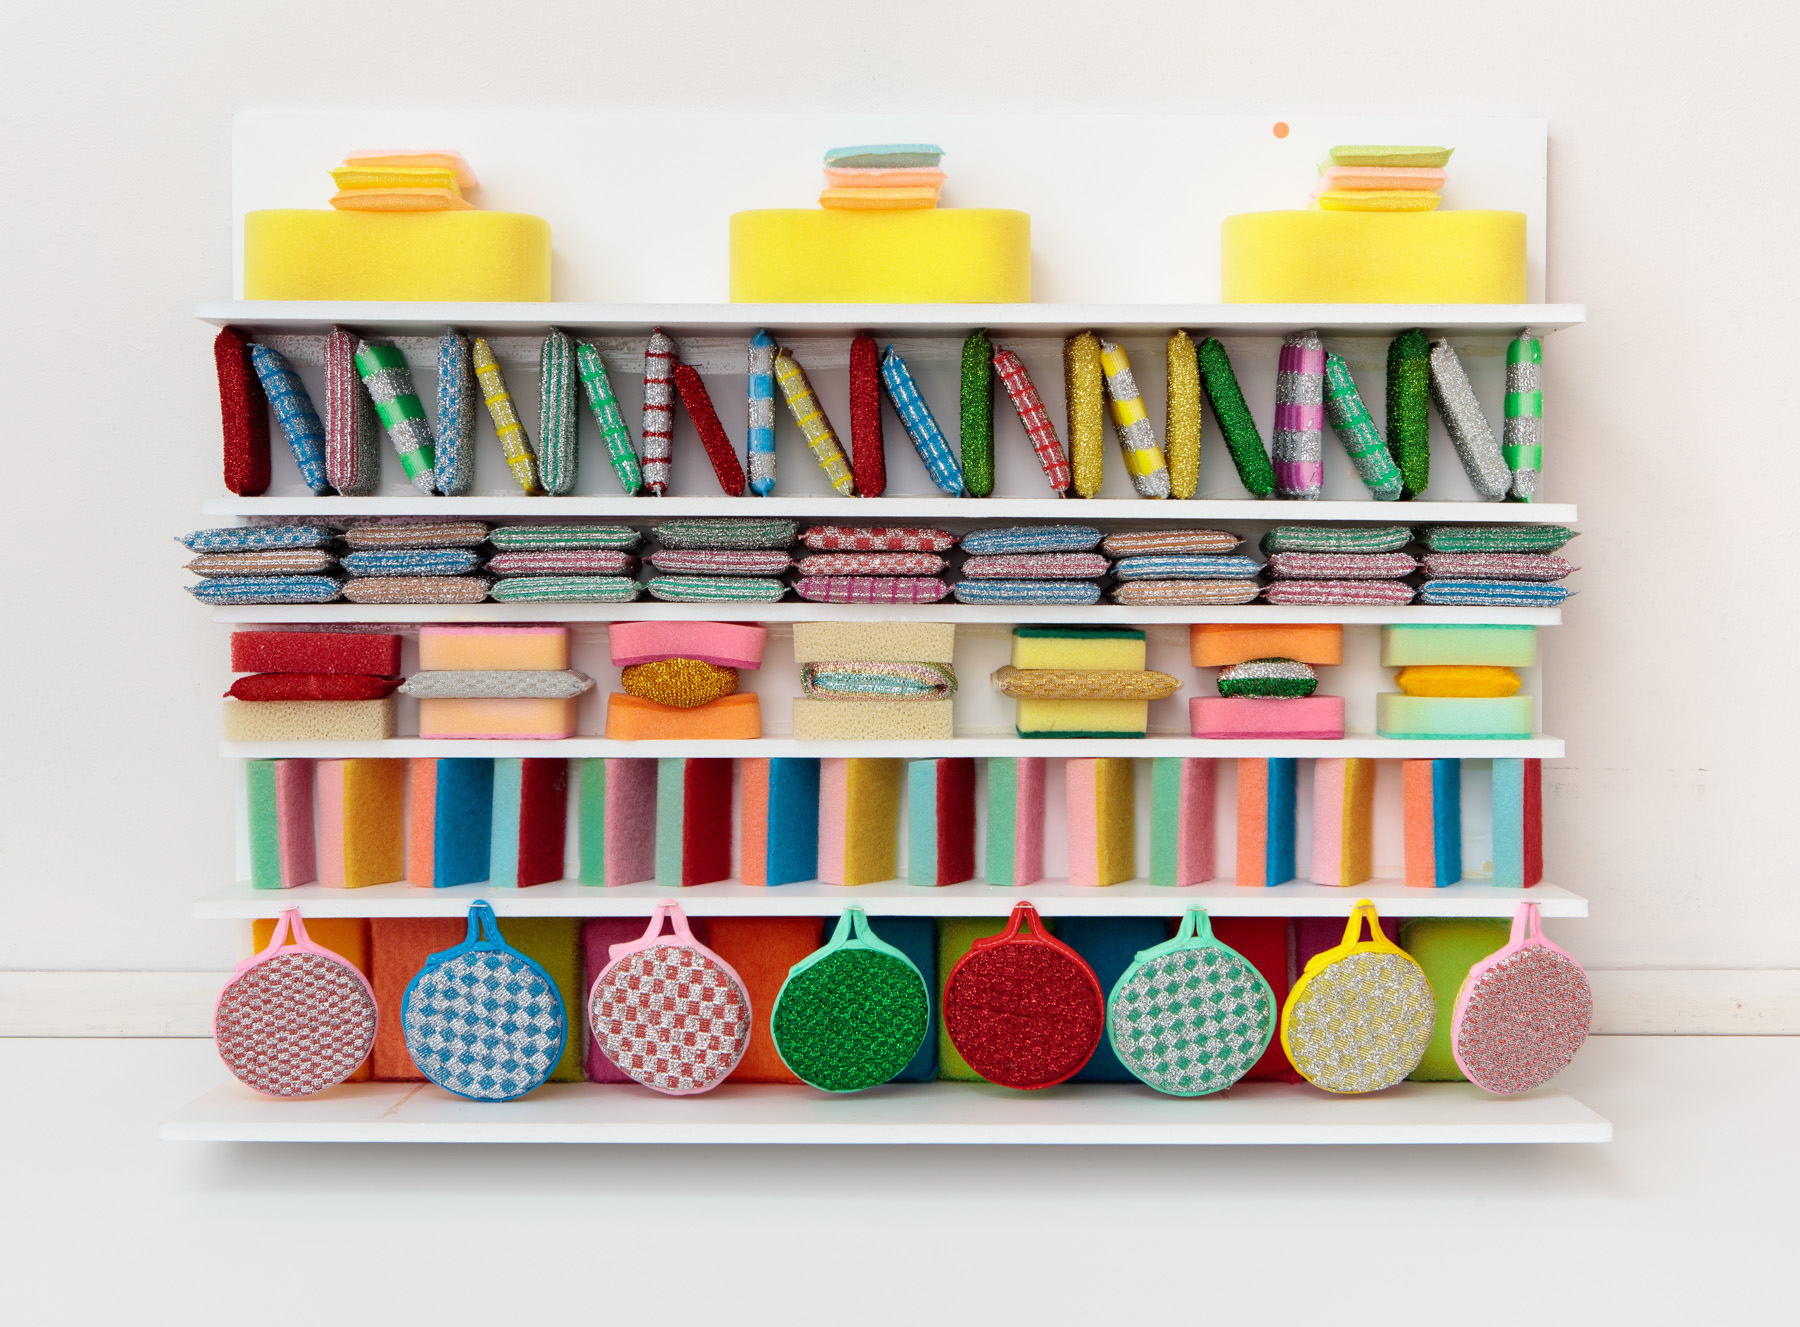 Foam Core Shelf with Many different sponges